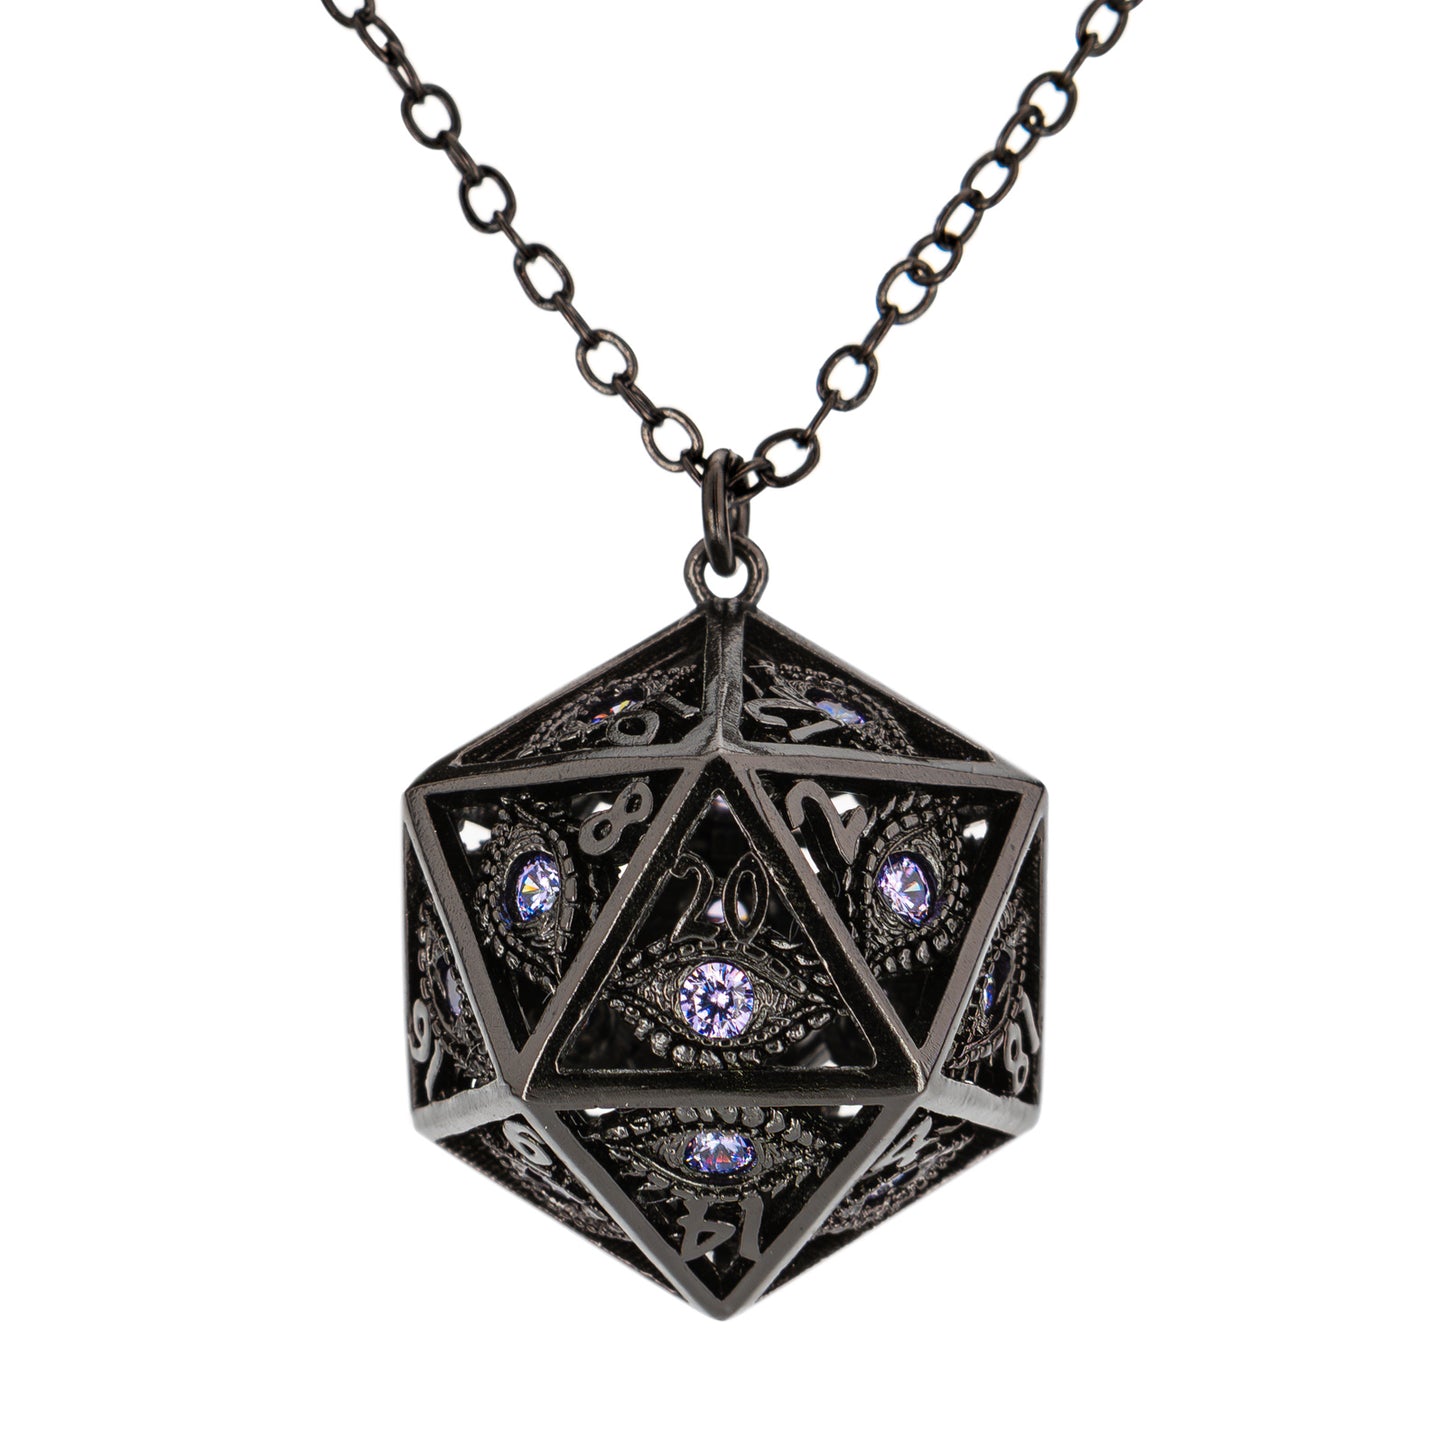 Hasbro Dungeons & Dragons D20 Dice Pendant Necklace – Jewelry Brands Shop